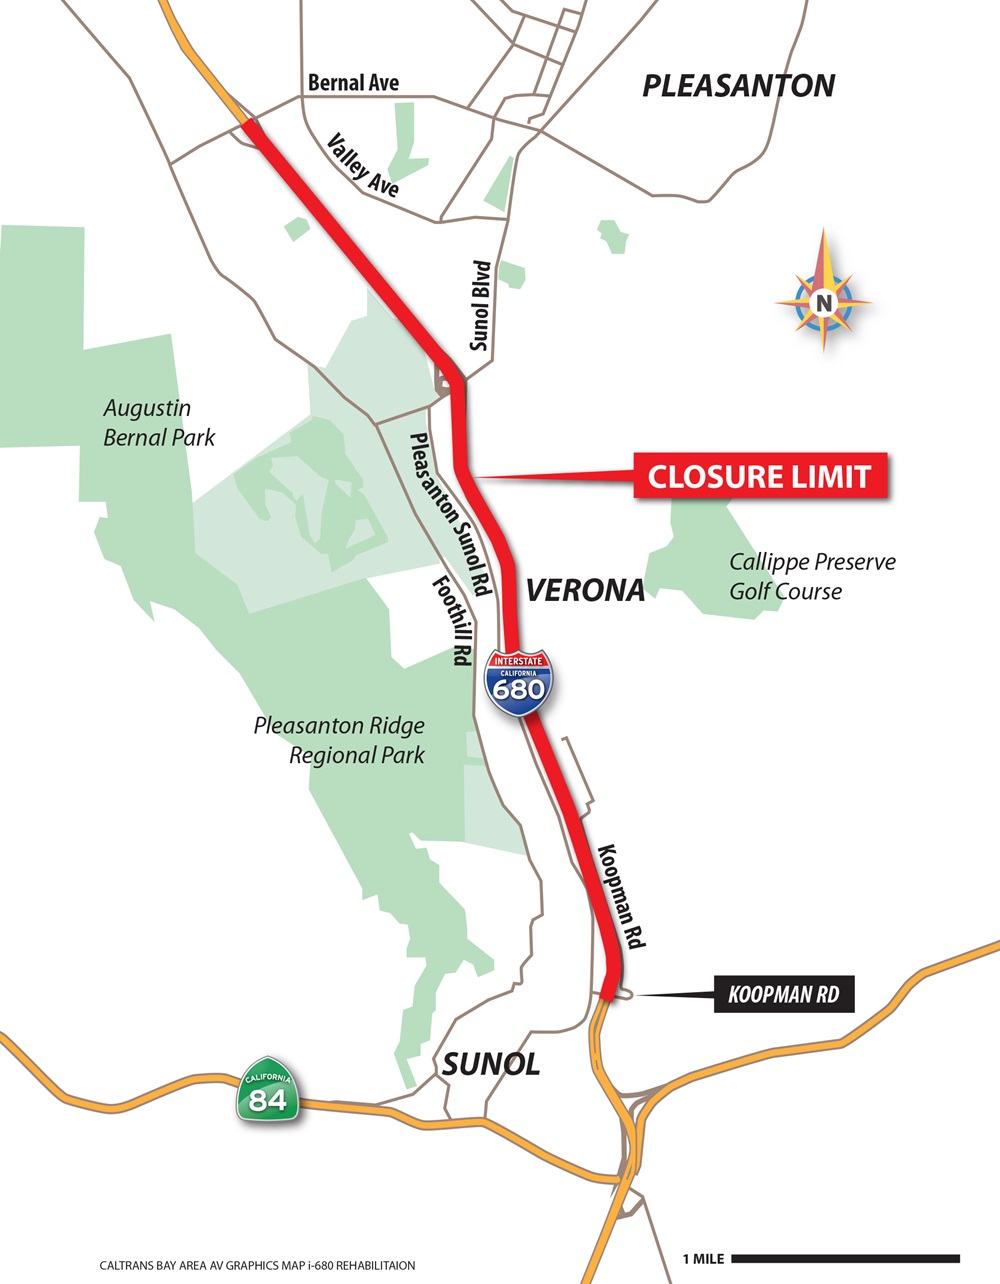 A map showing the closure area on I-680 between Sunol and Pleasanton in Alameda county.